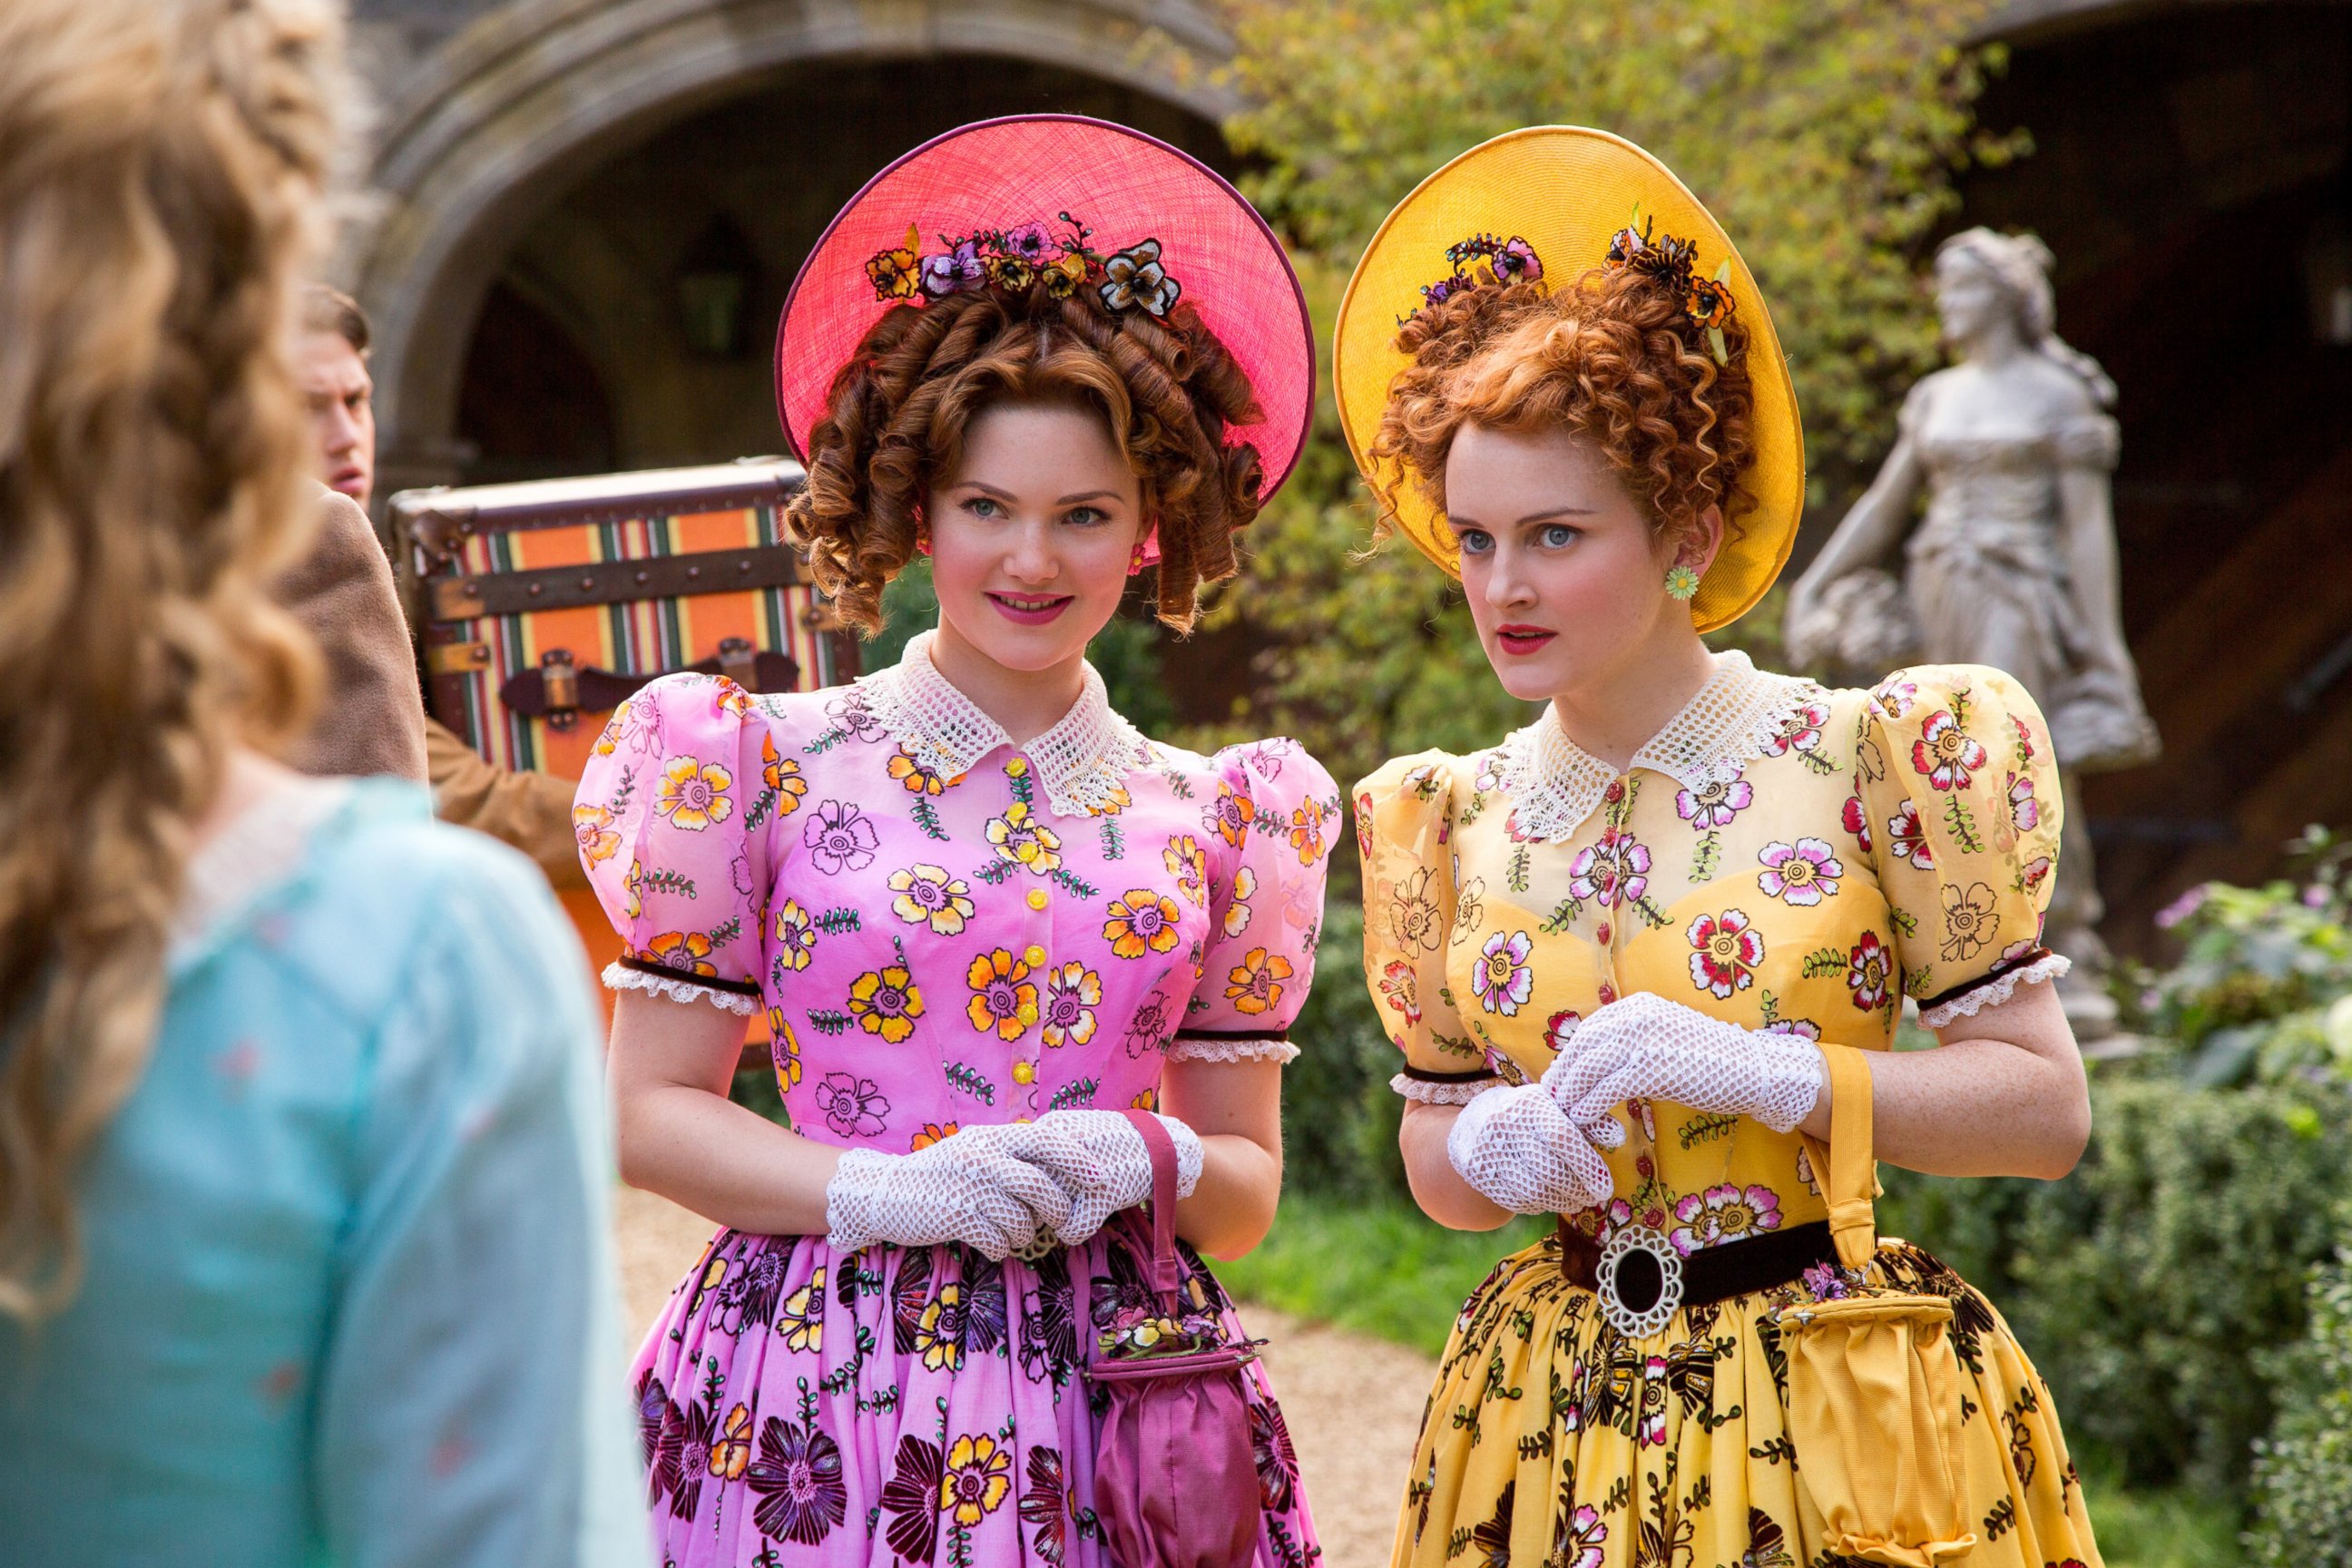 PHOTO: Holliday Grainger as Anastasia and Sophie McShera as Drisella and in Disney's live-action feature inspired by the classic fairy tale, "Cinderella."